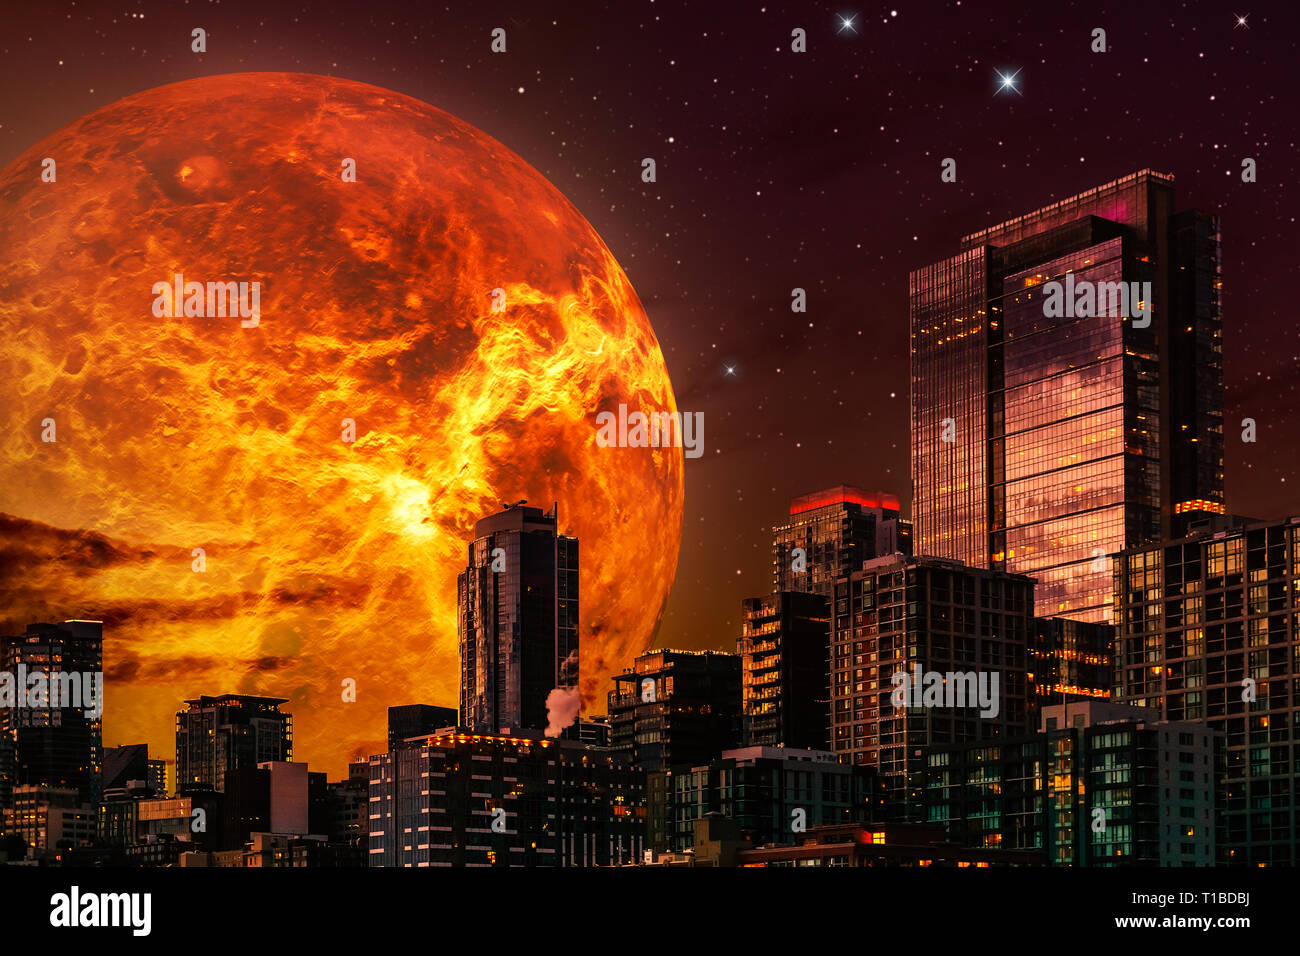 Sci-fi cityscape illustration. Skyline at night with giant planet or sun in the background and a starry sky. Composite illustration with 3d rendering  Stock Photo